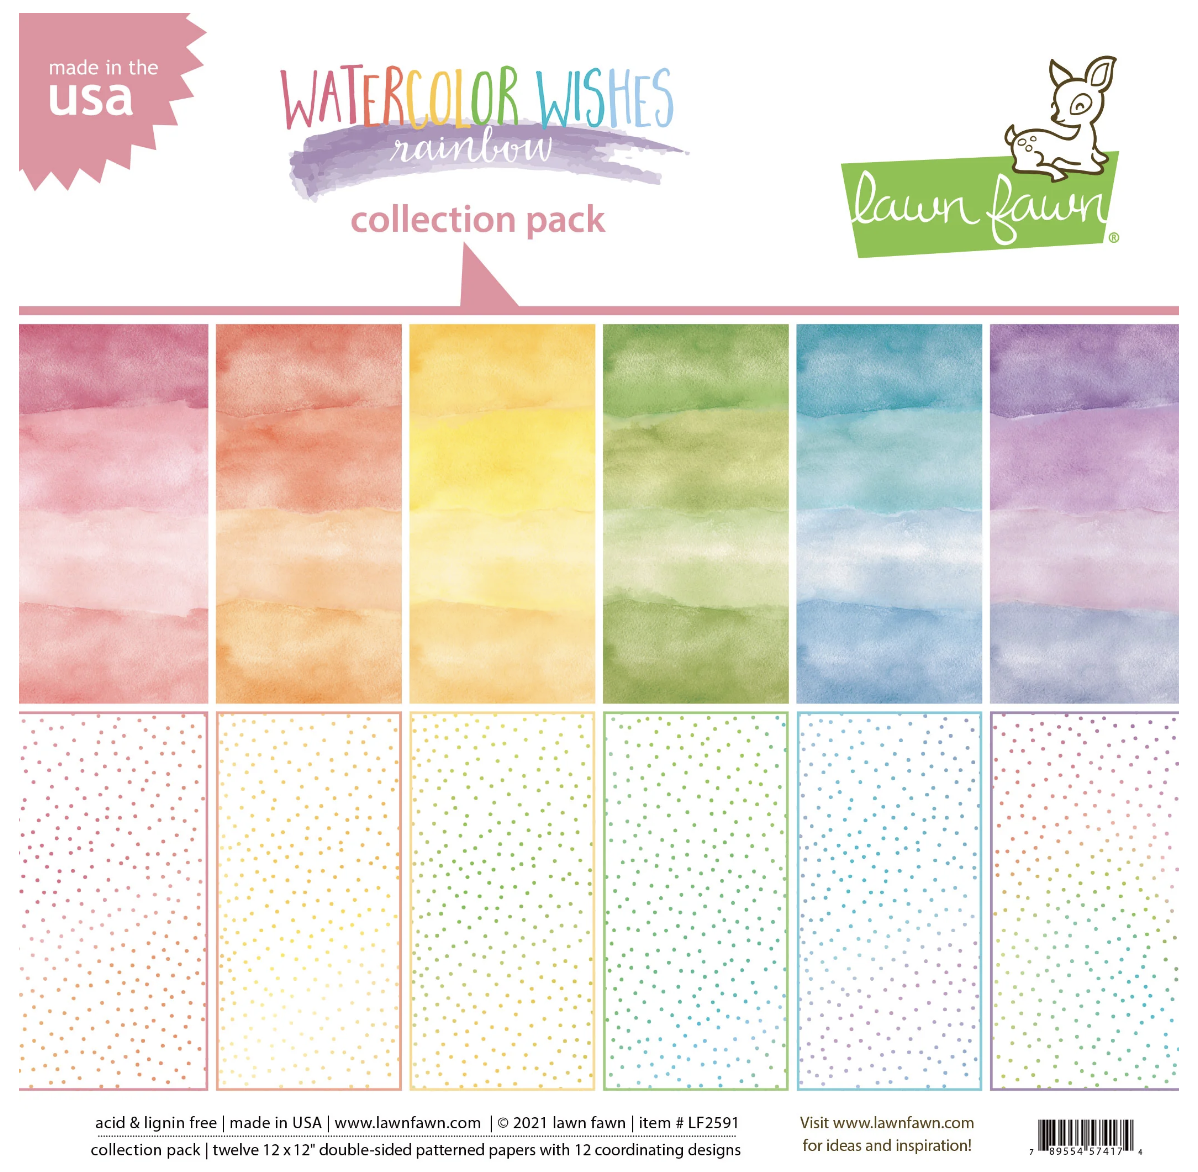 Lawn Fawn, Watercolor Wishes Rainbow 12x12 Collection Pack